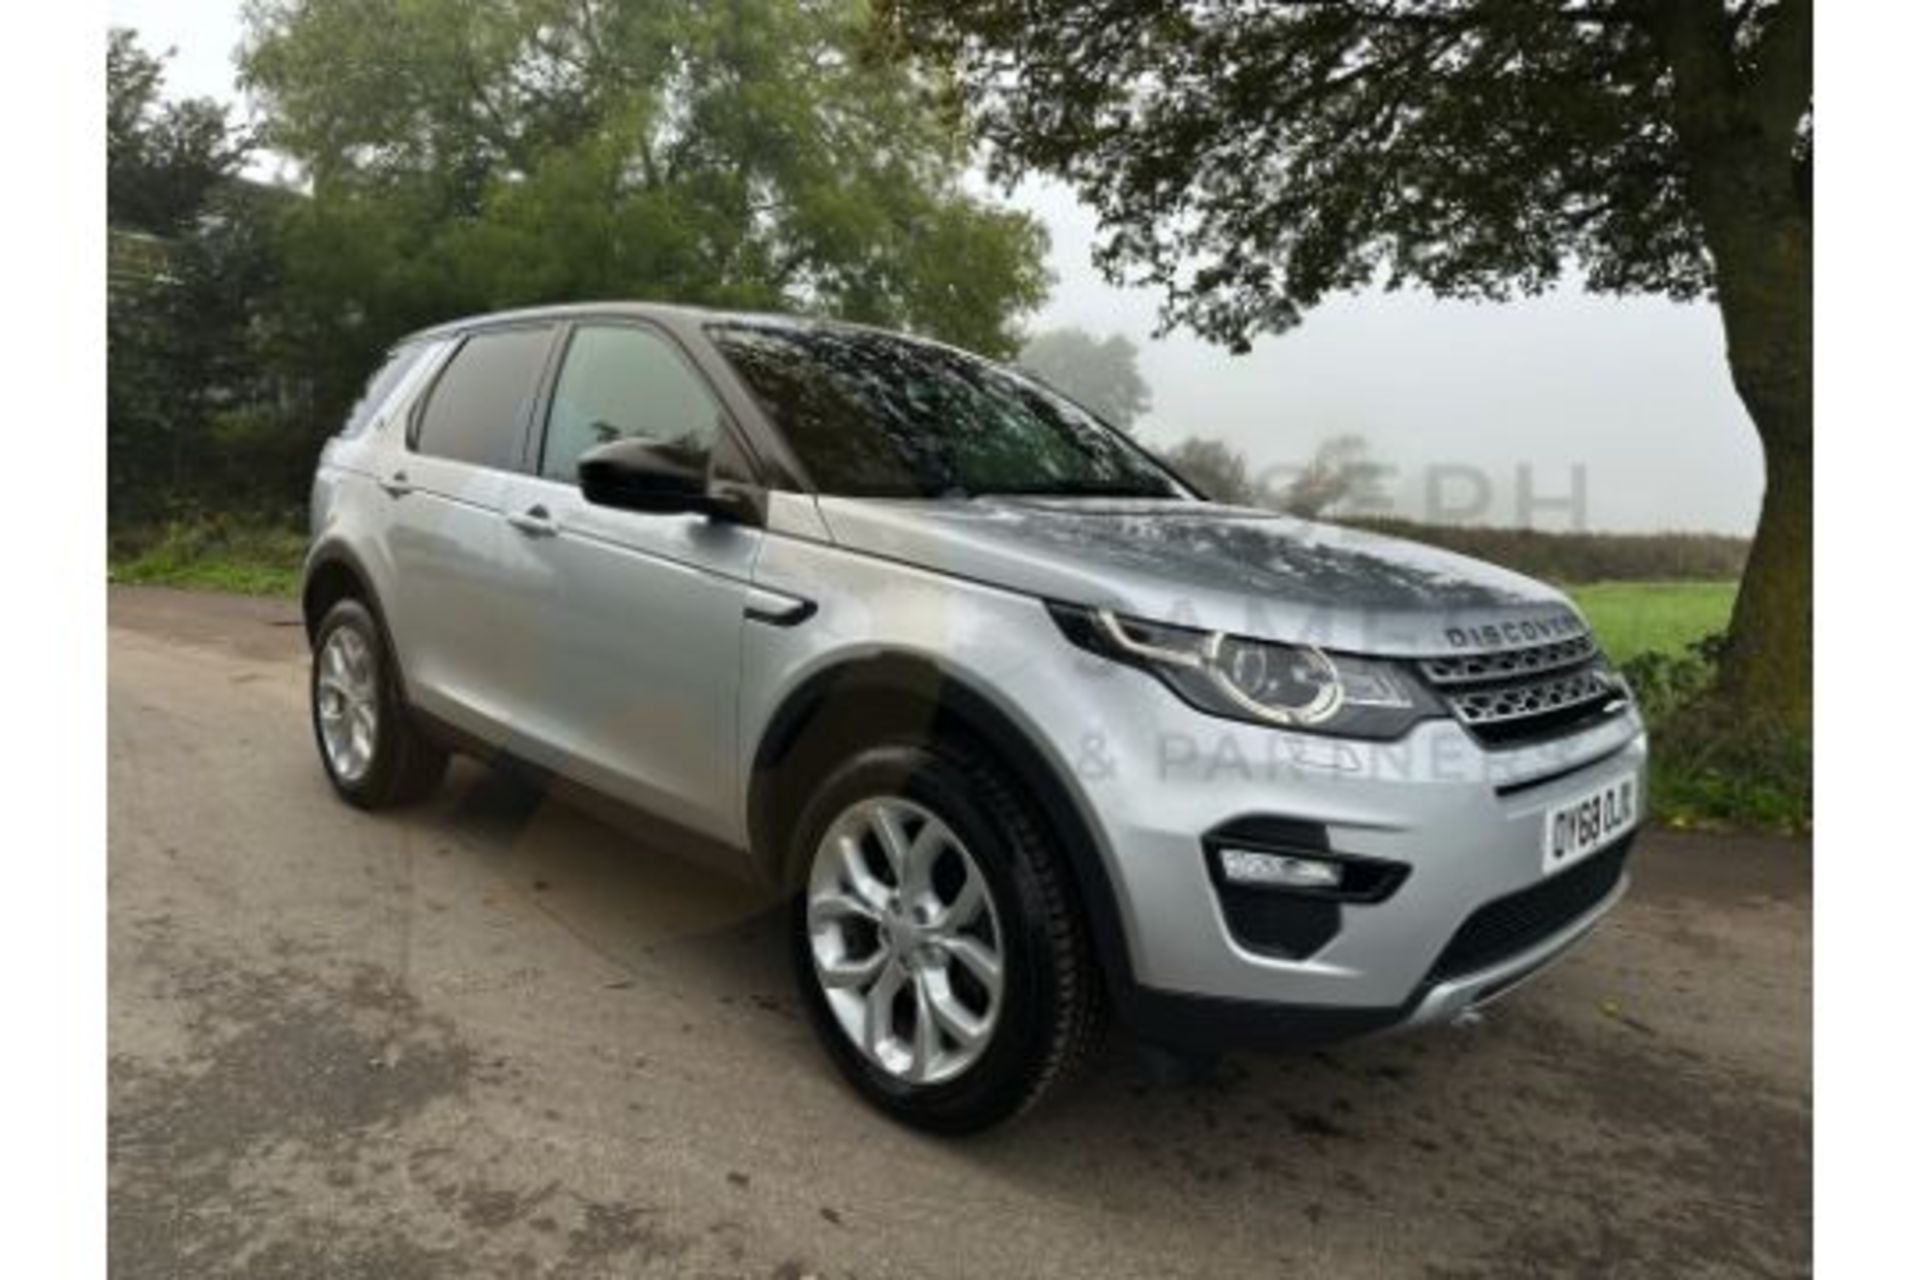 (ON SALE) LANDROVER DISCOVERY SPORT "HSE" EDITION 2.0 TD4 (180) AUTOMATIC - 68 REG - PAN ROOF - Image 5 of 51